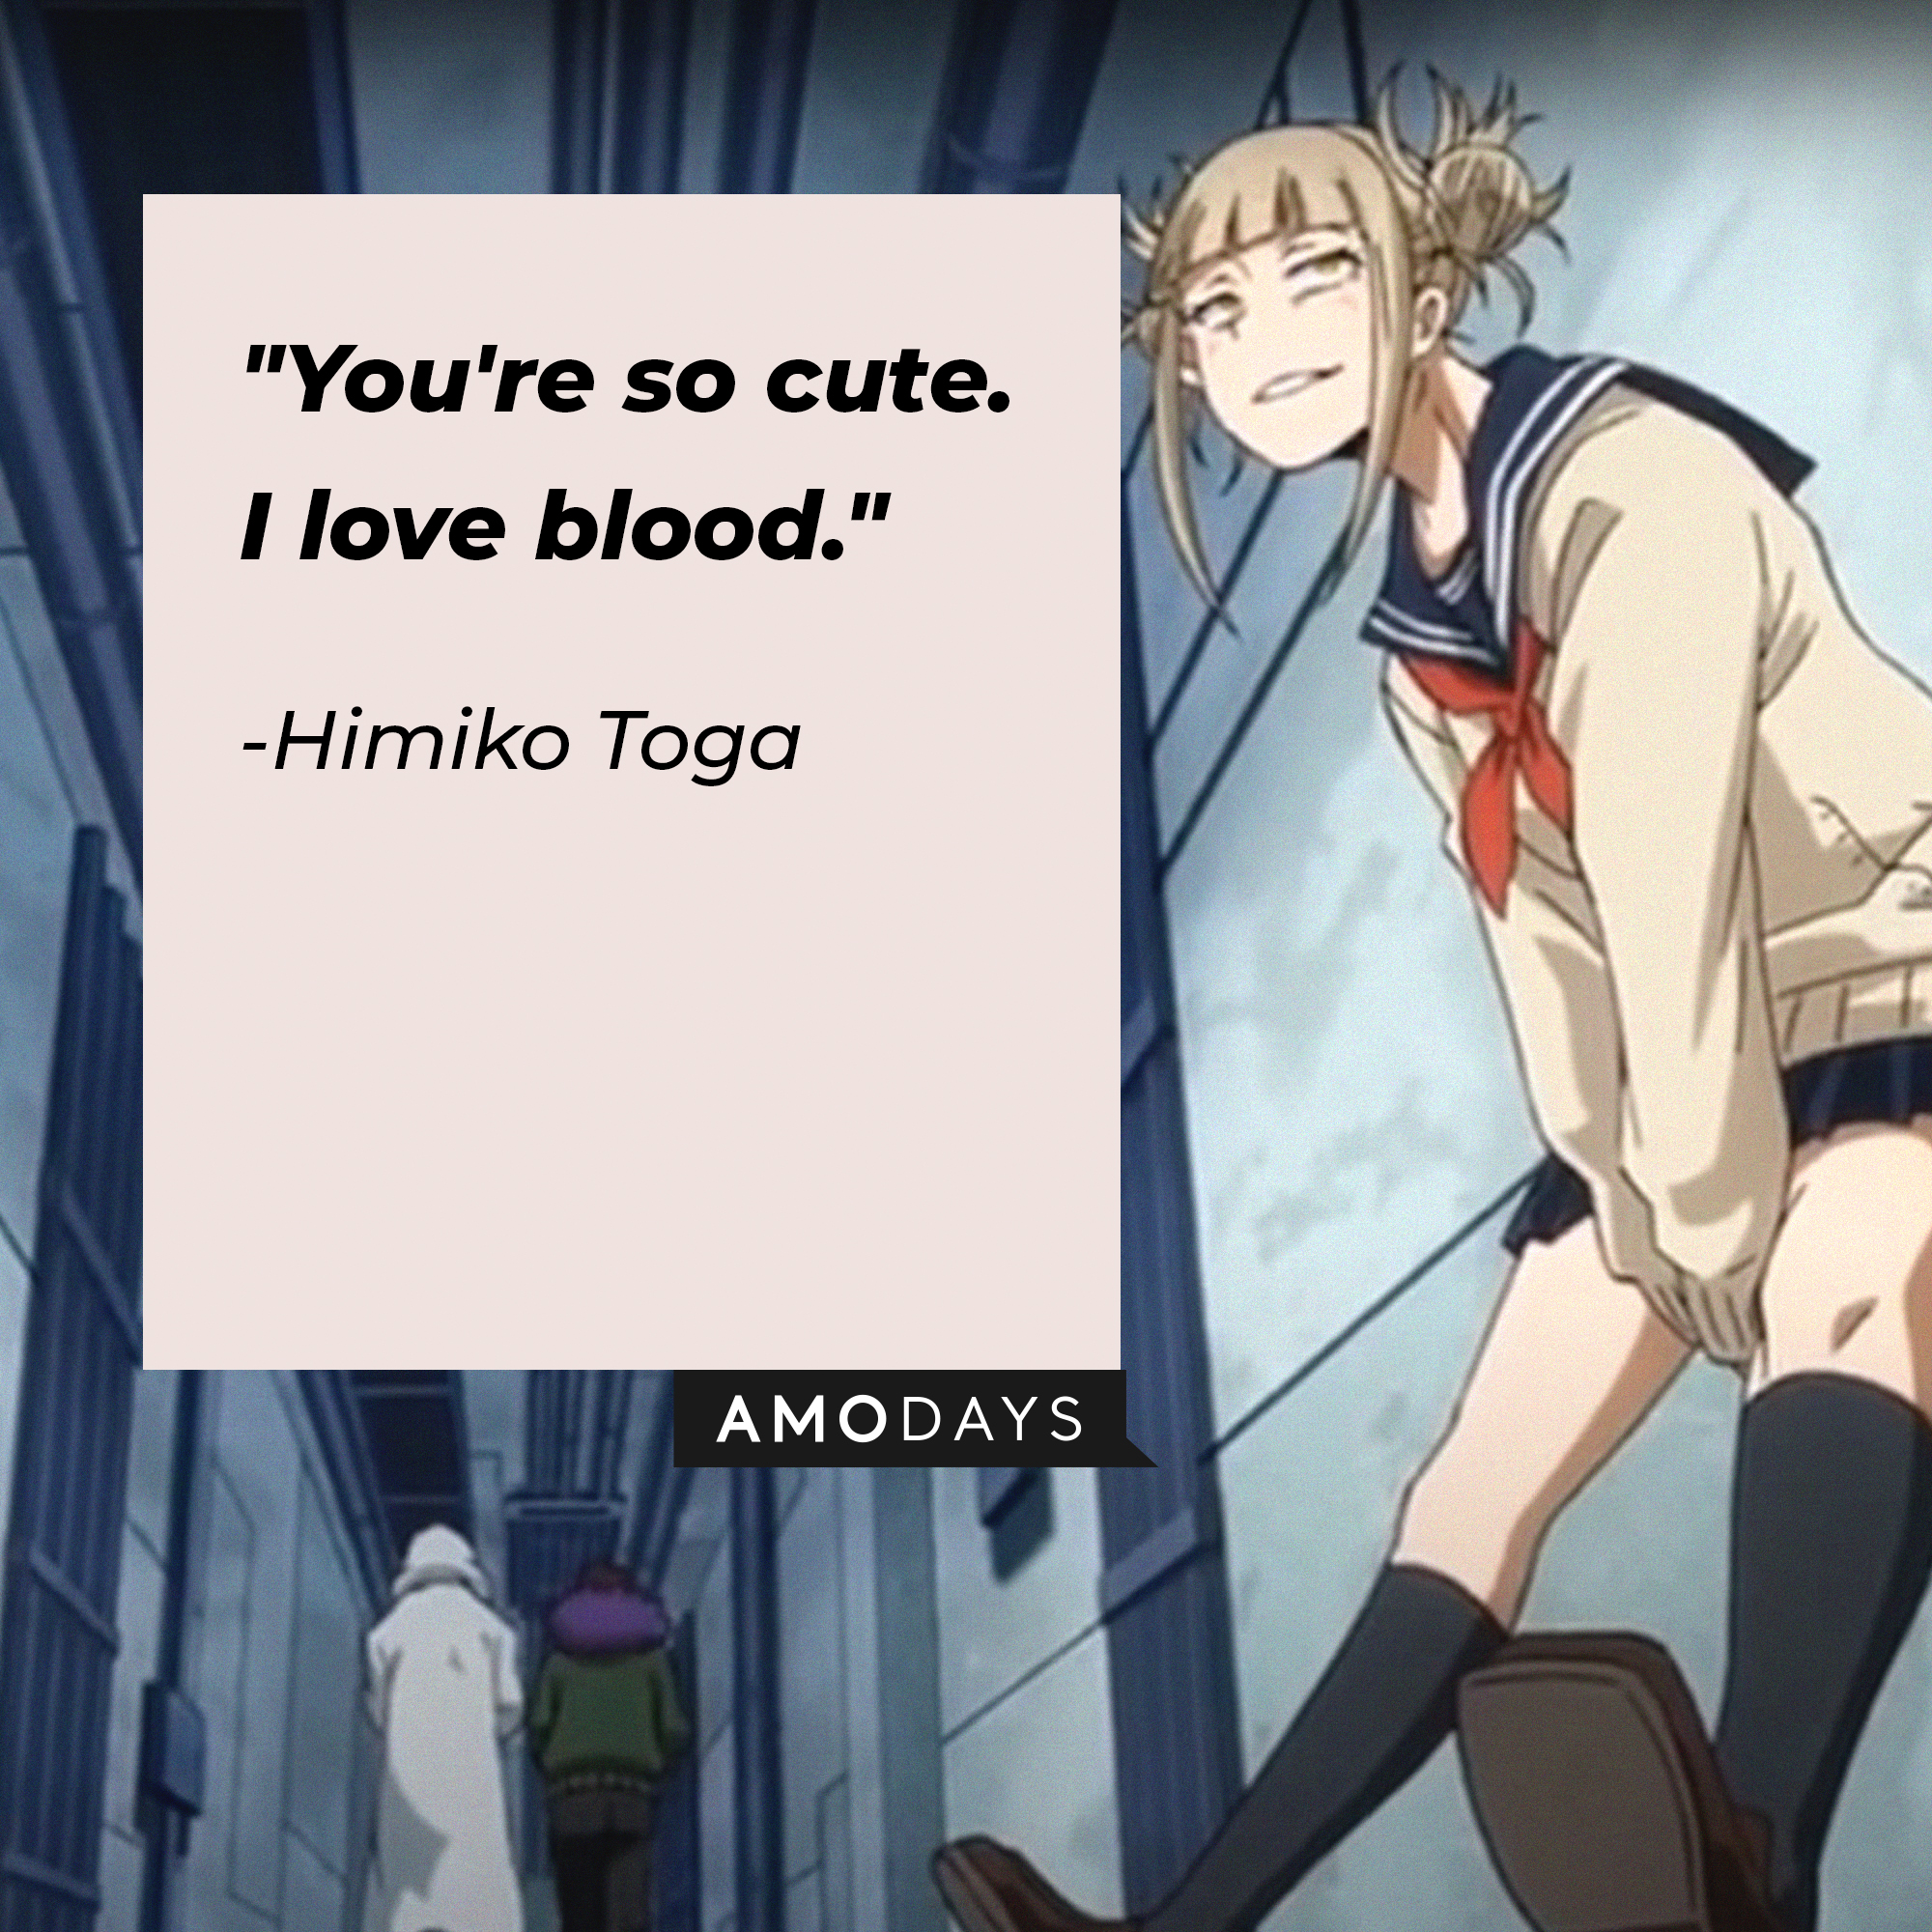 Himiko Toga’s quote: "You're so cute. I love blood." | Image: AmoDays